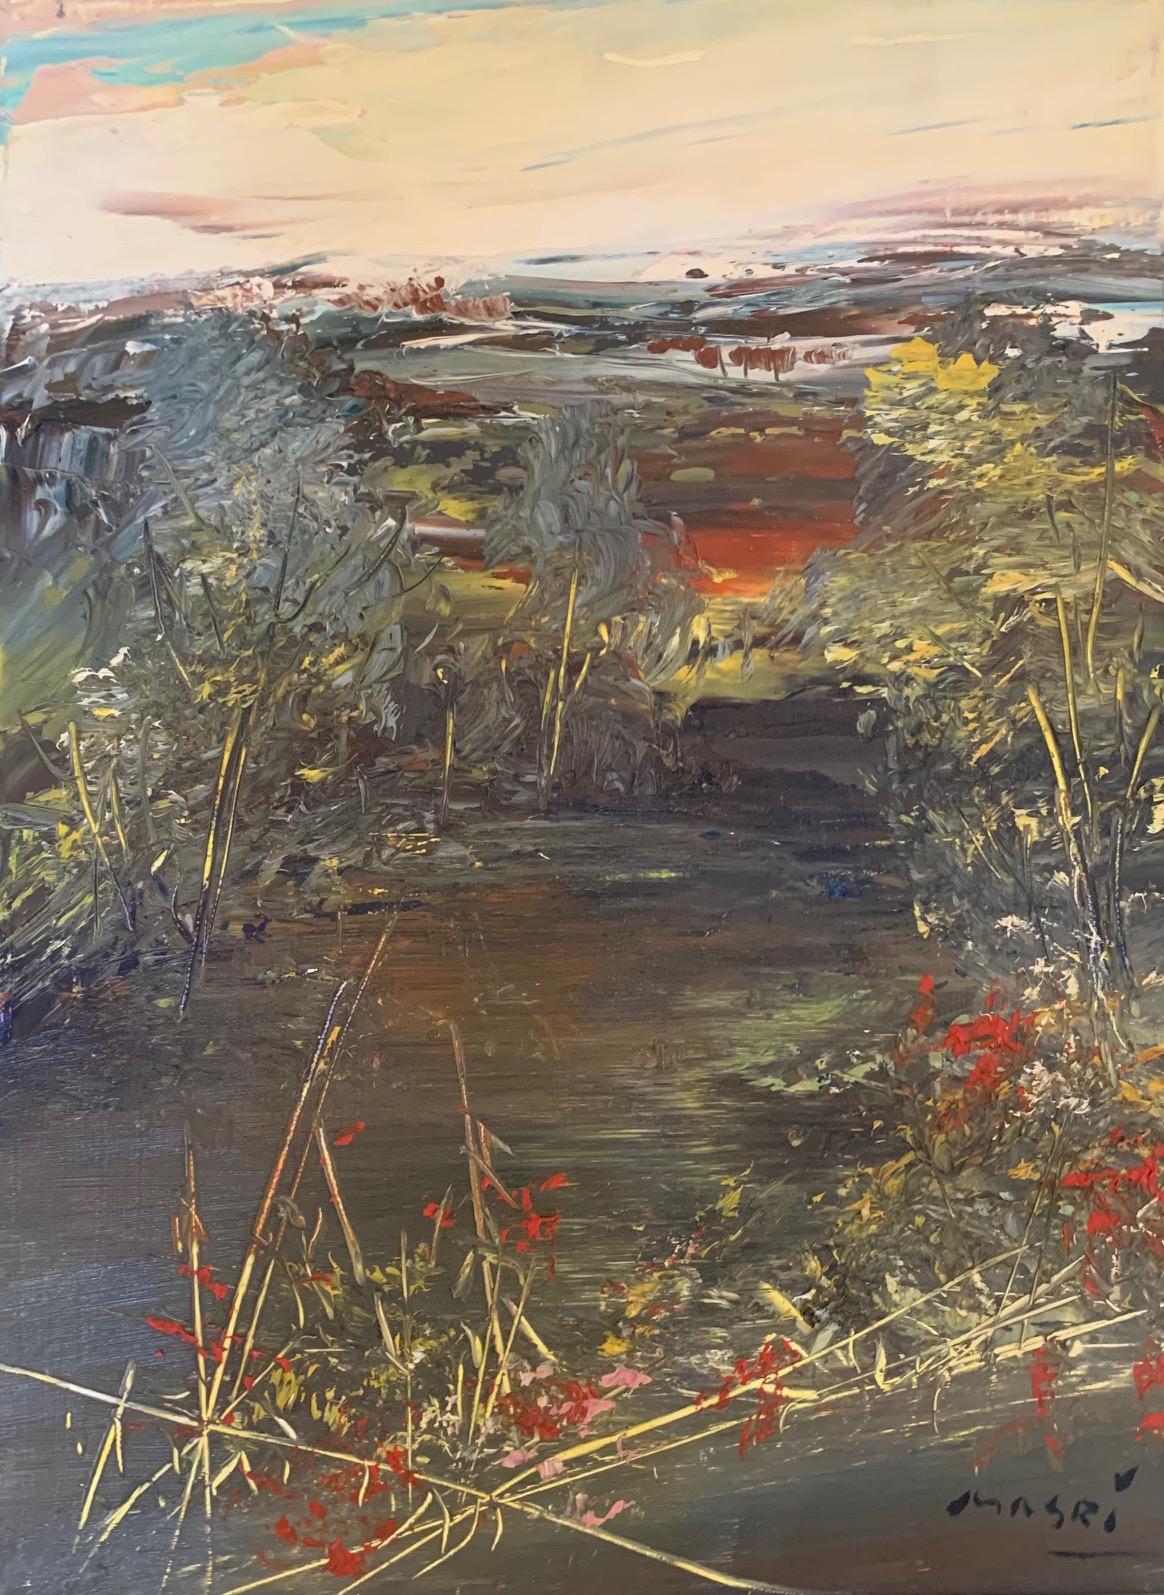 'Nature with Red' oil on canvas by Masri - Landscape Art